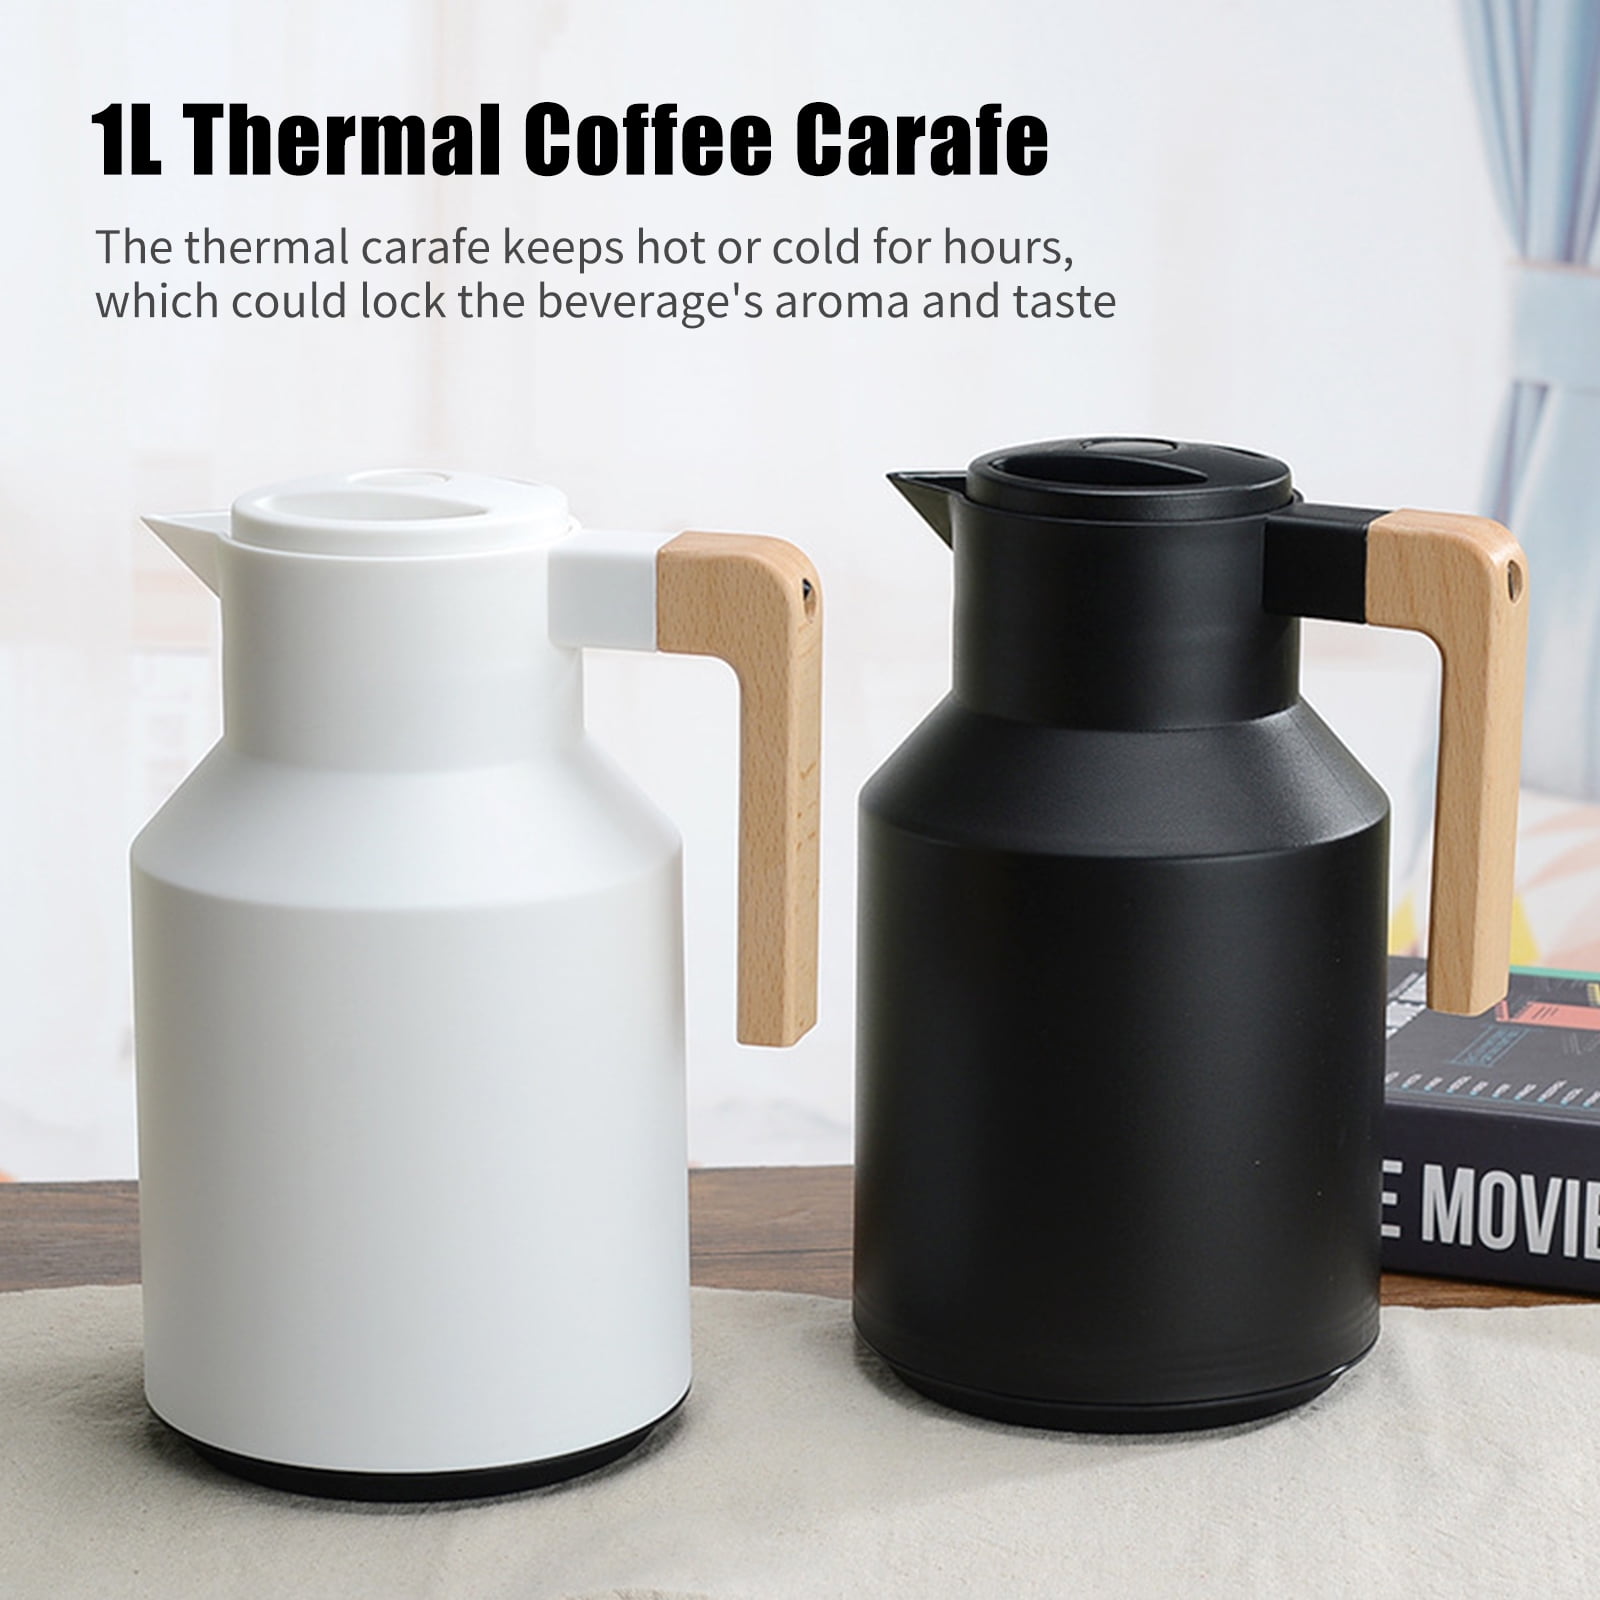 Lafeeca Thermal Coffee Carafe - Beverages Dispenser - Tea Pot Water Pitcher - Double Wall Insulated Thermos - 1500 ml Stainless